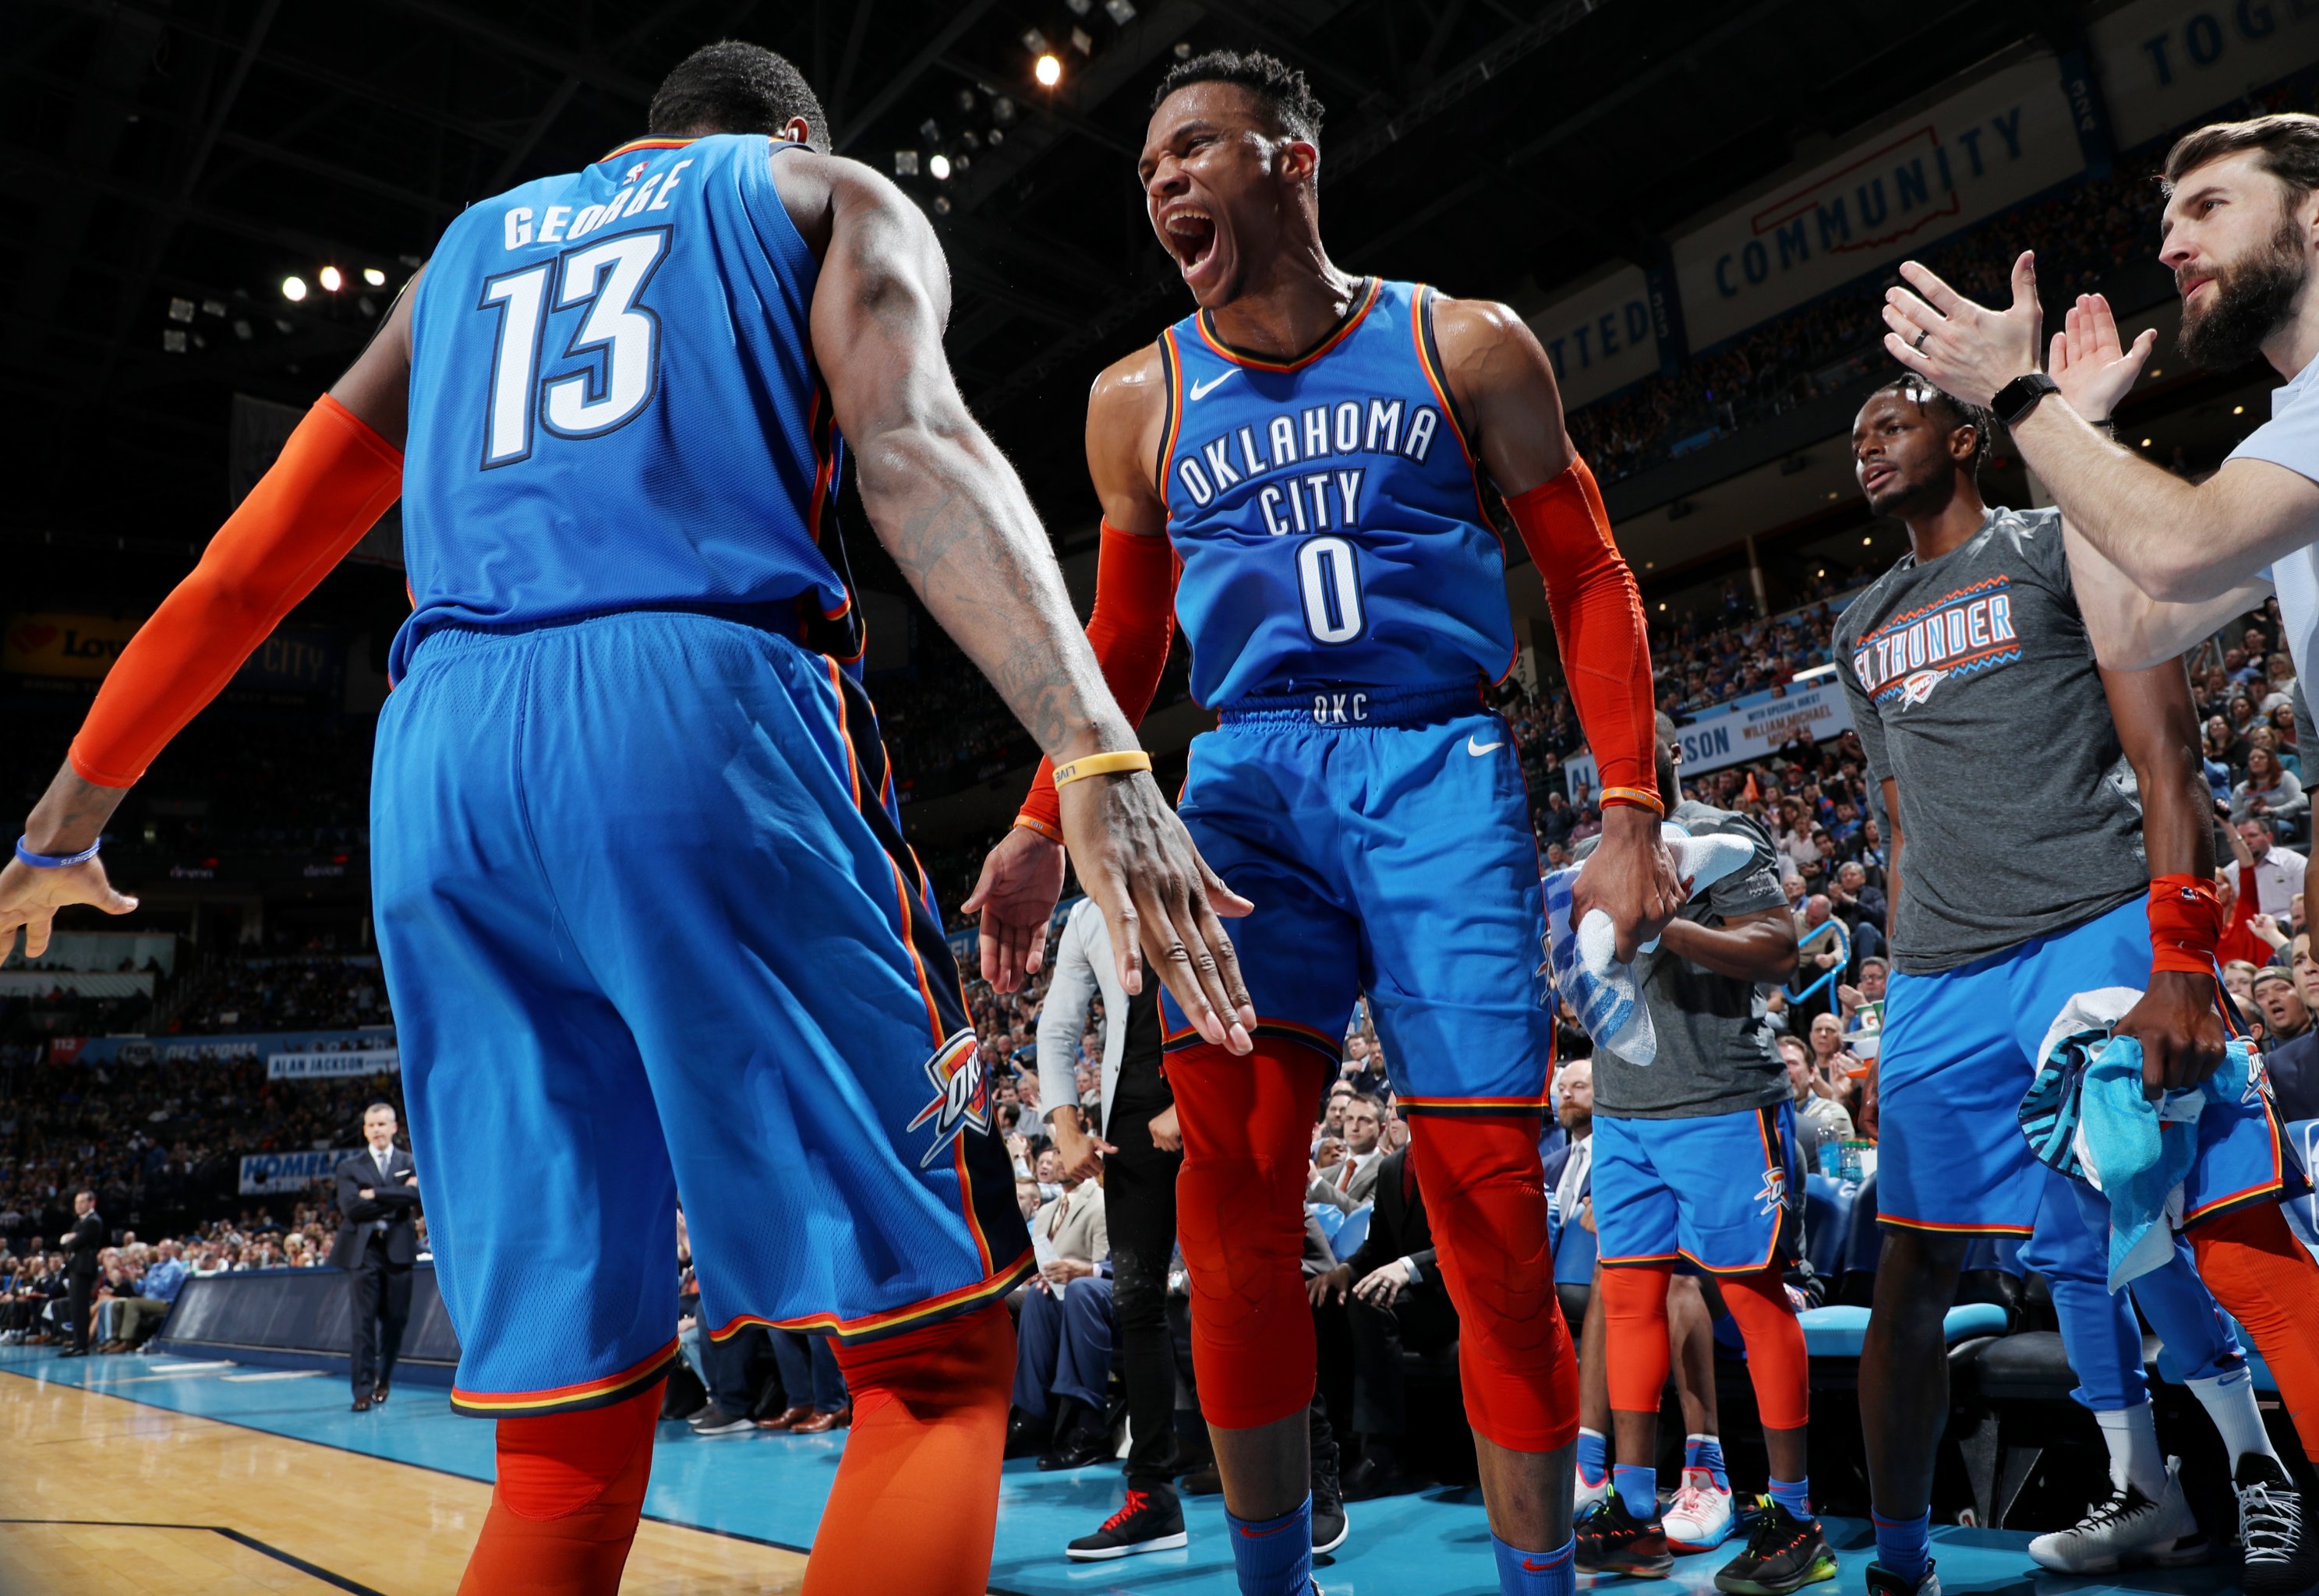 Oklahoma City Thunder: 2018-19 player grades for Russell Westbrook